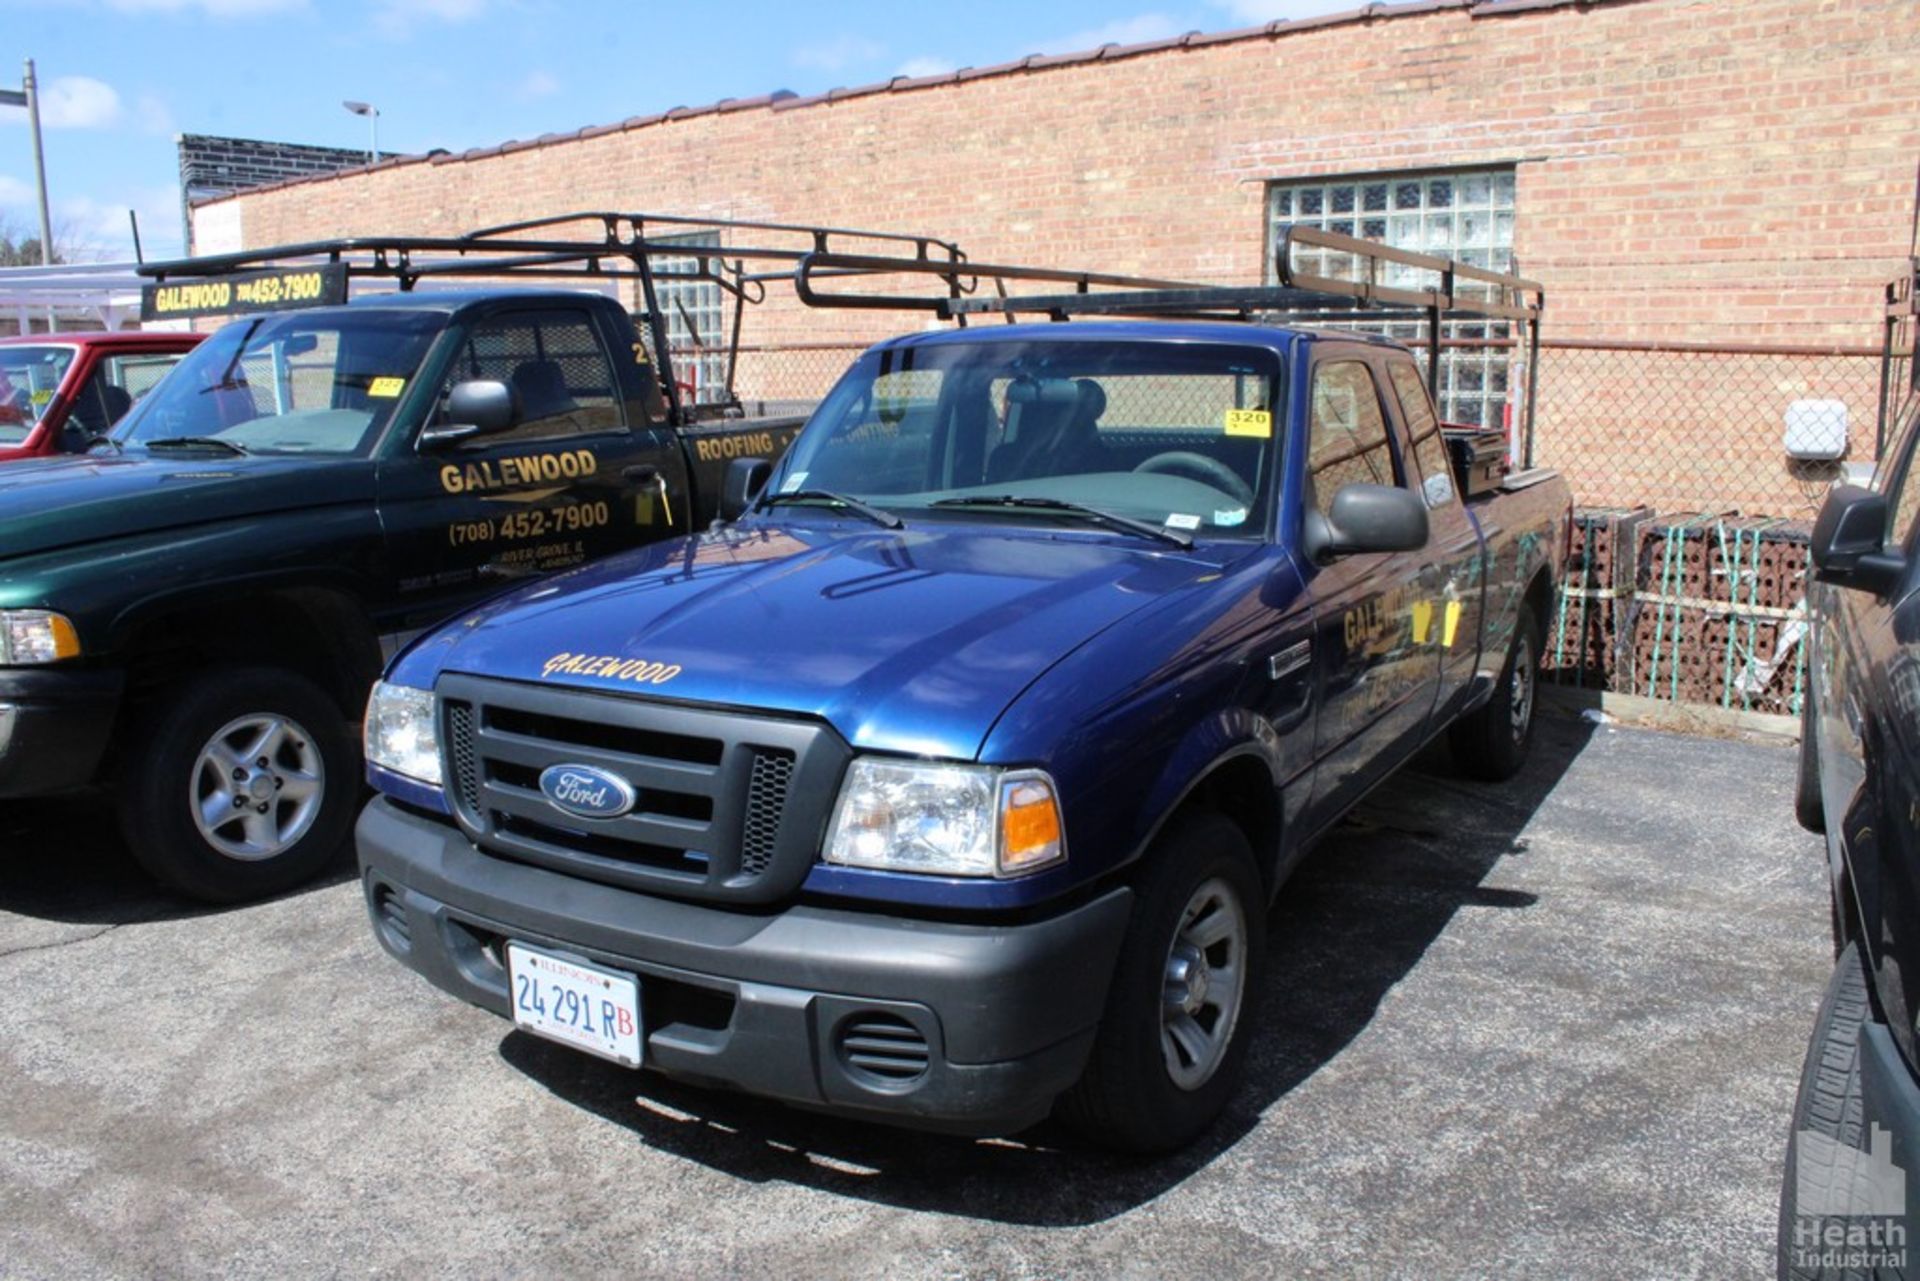 2008 FORD MODEL RANGER SUPER CAB PICK UP TRUCK, VIN: 1FTYR14DX8PA31416, AUTOMATIC TRANSMISSION,